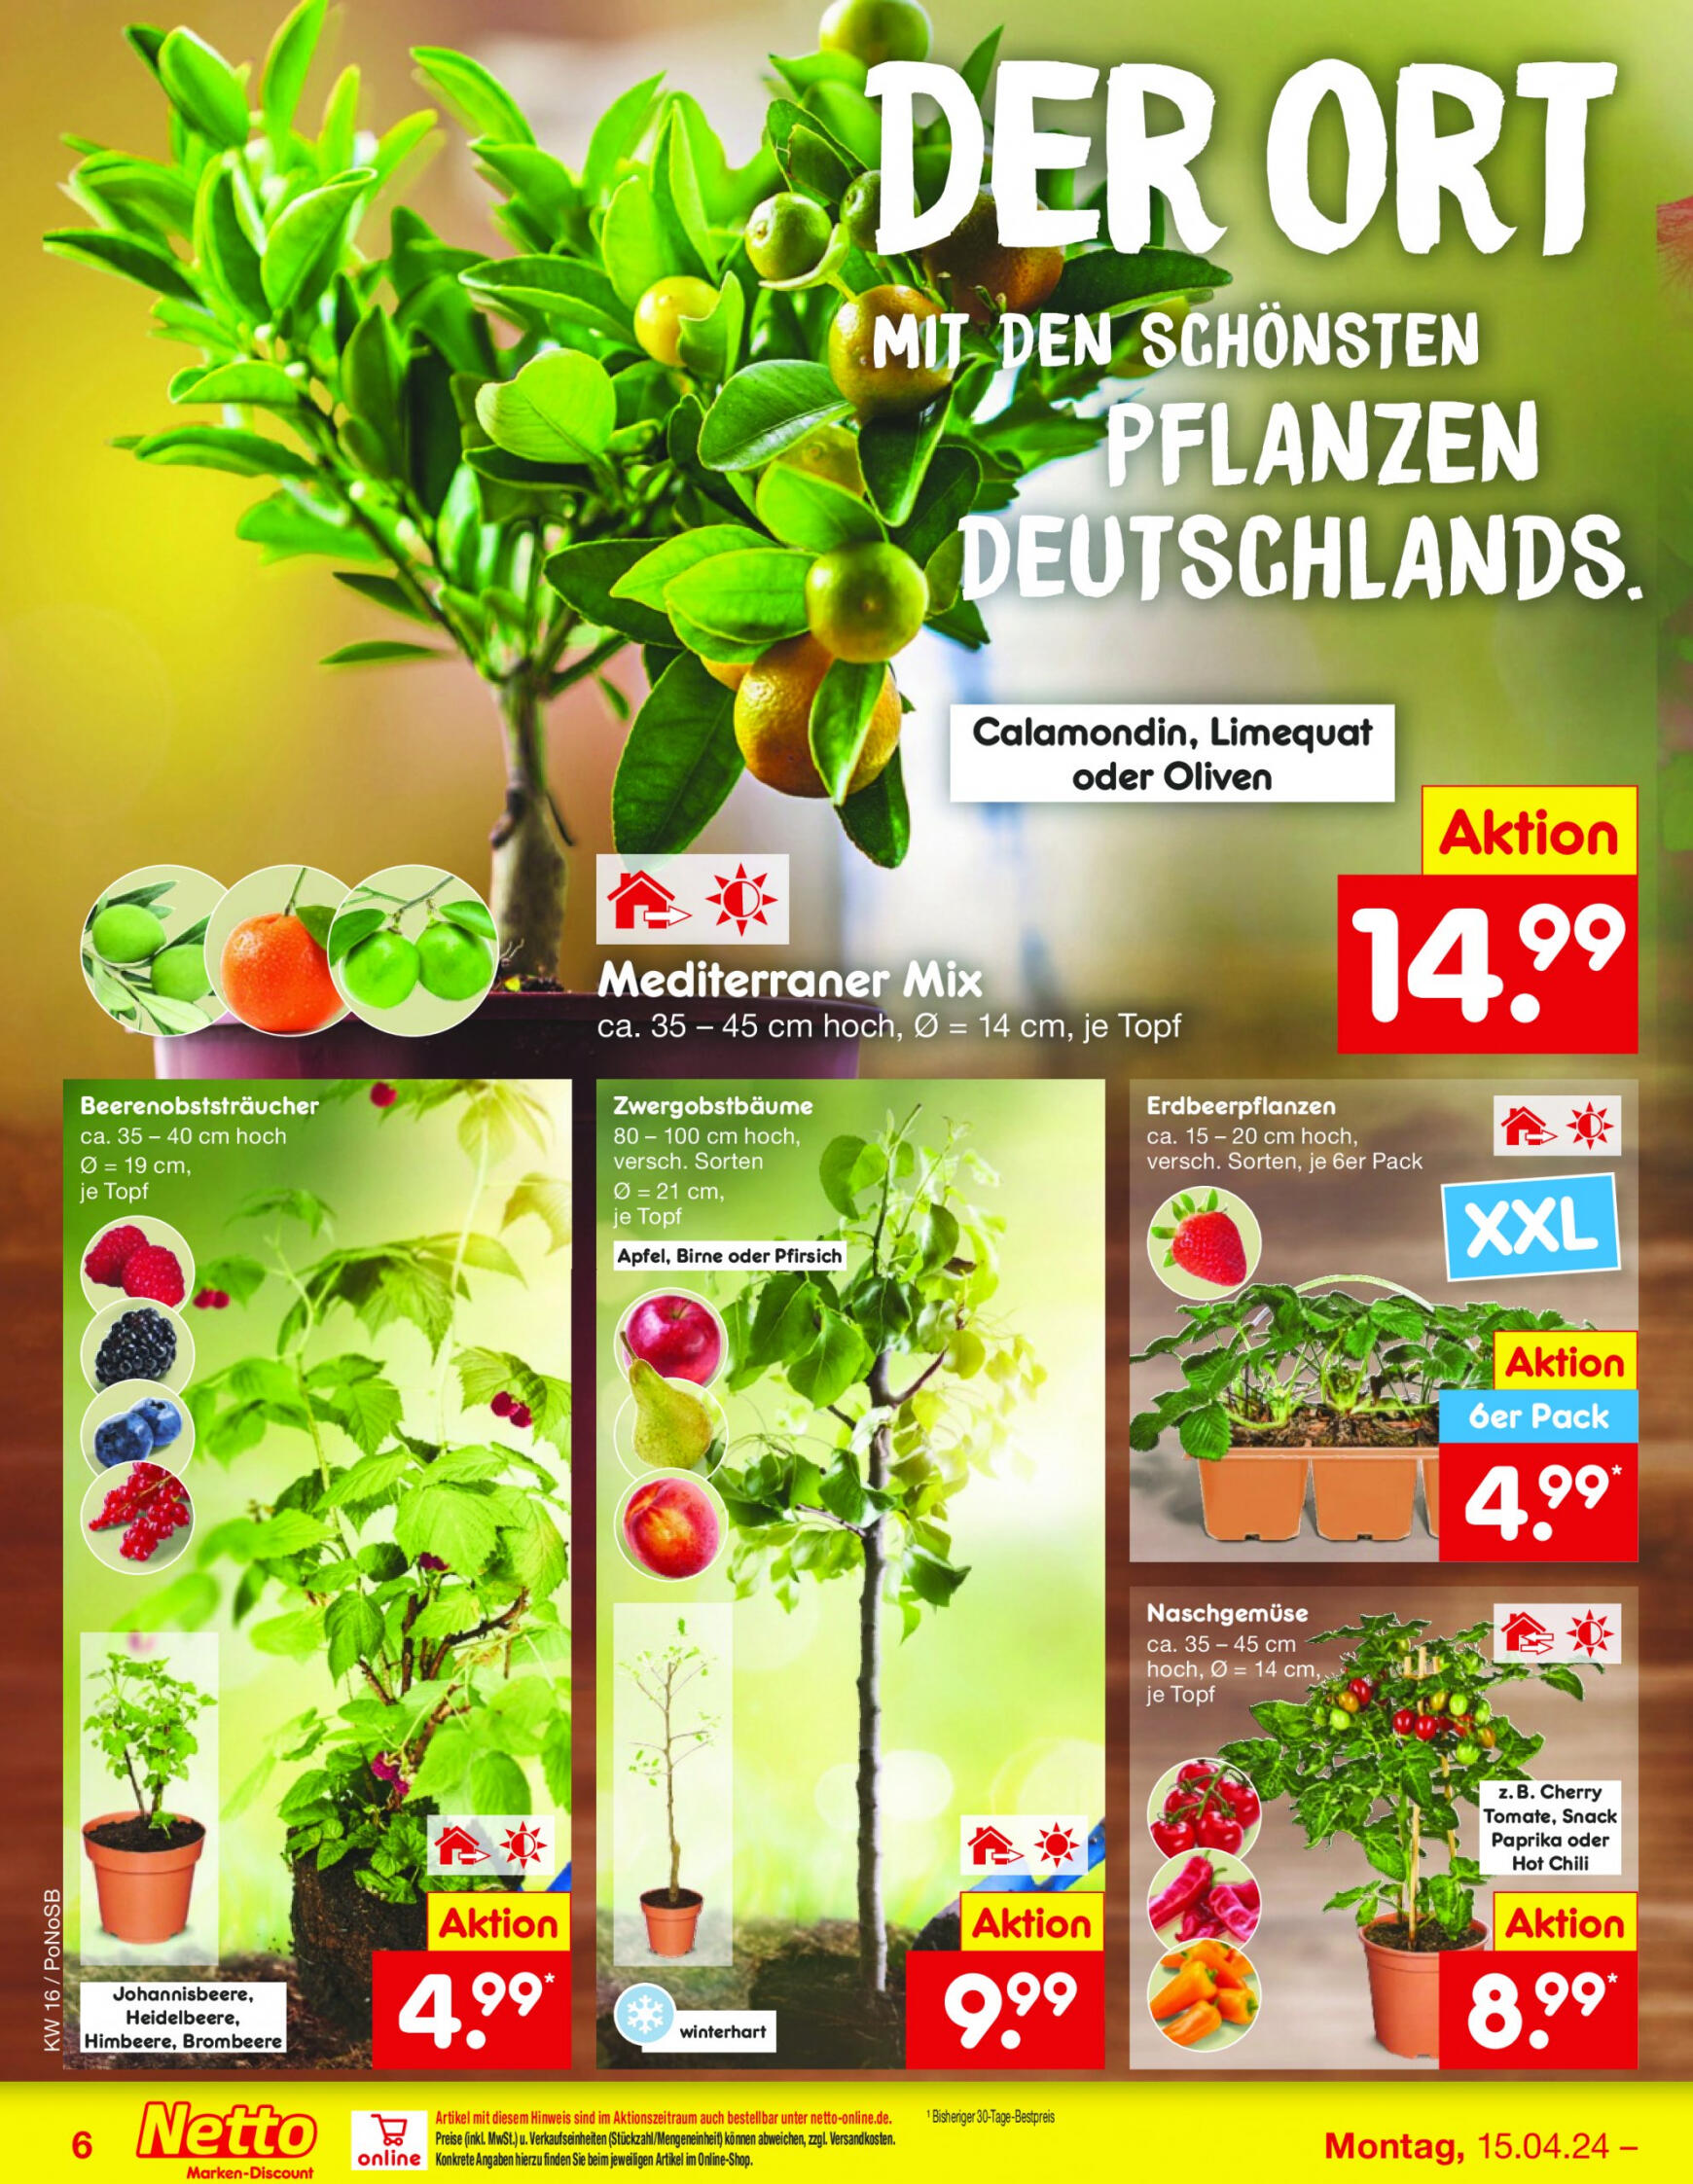 netto - Flyer Netto aktuell 15.04. - 20.04. - page: 6